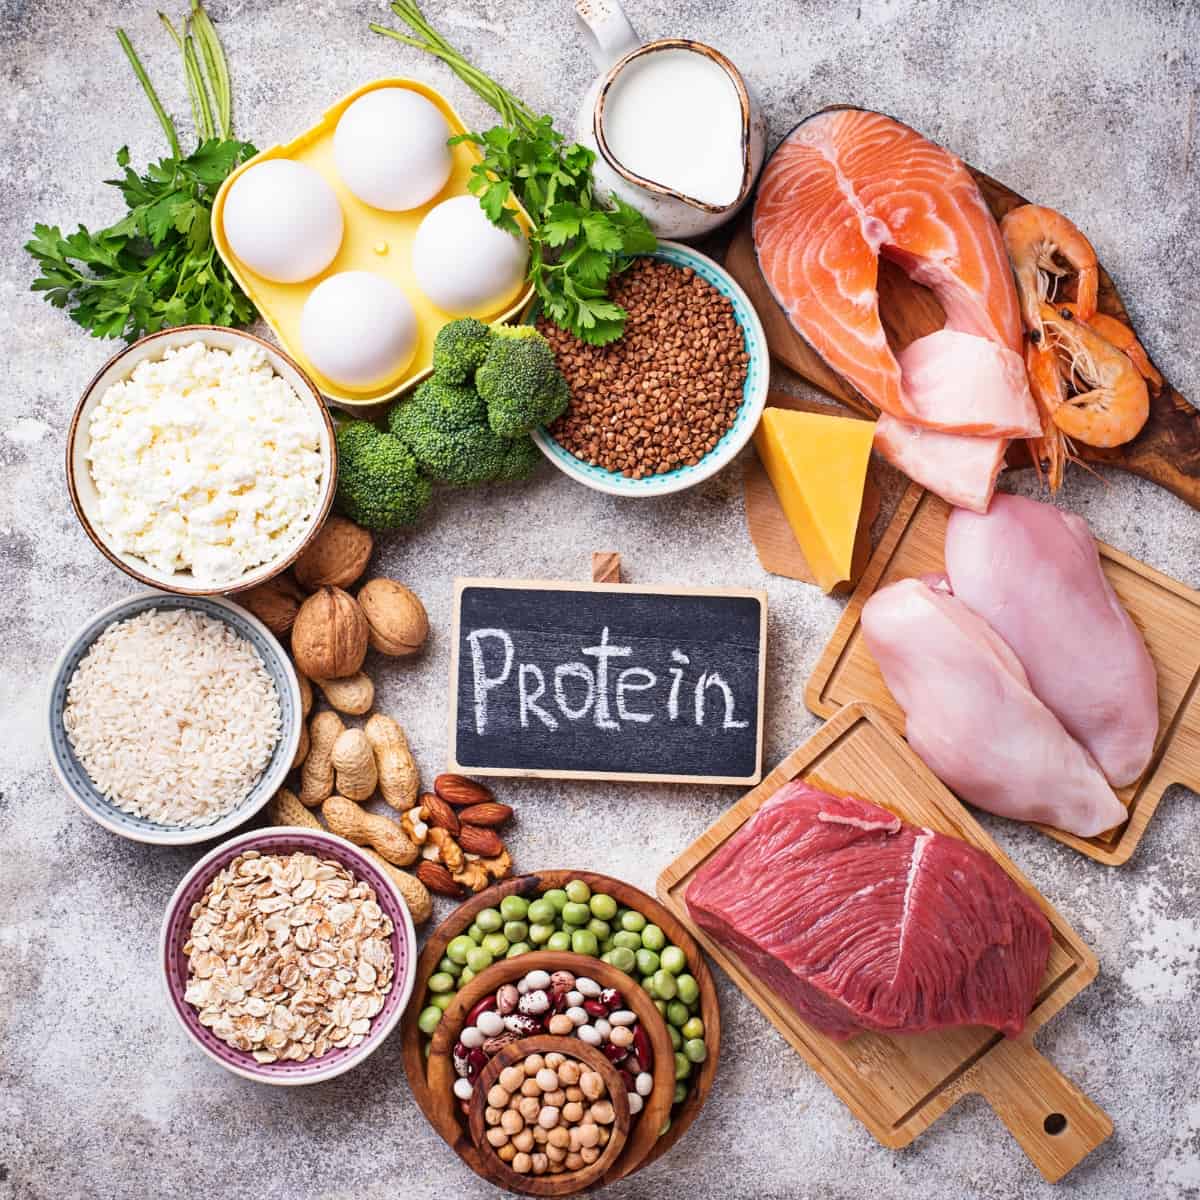 What is protein